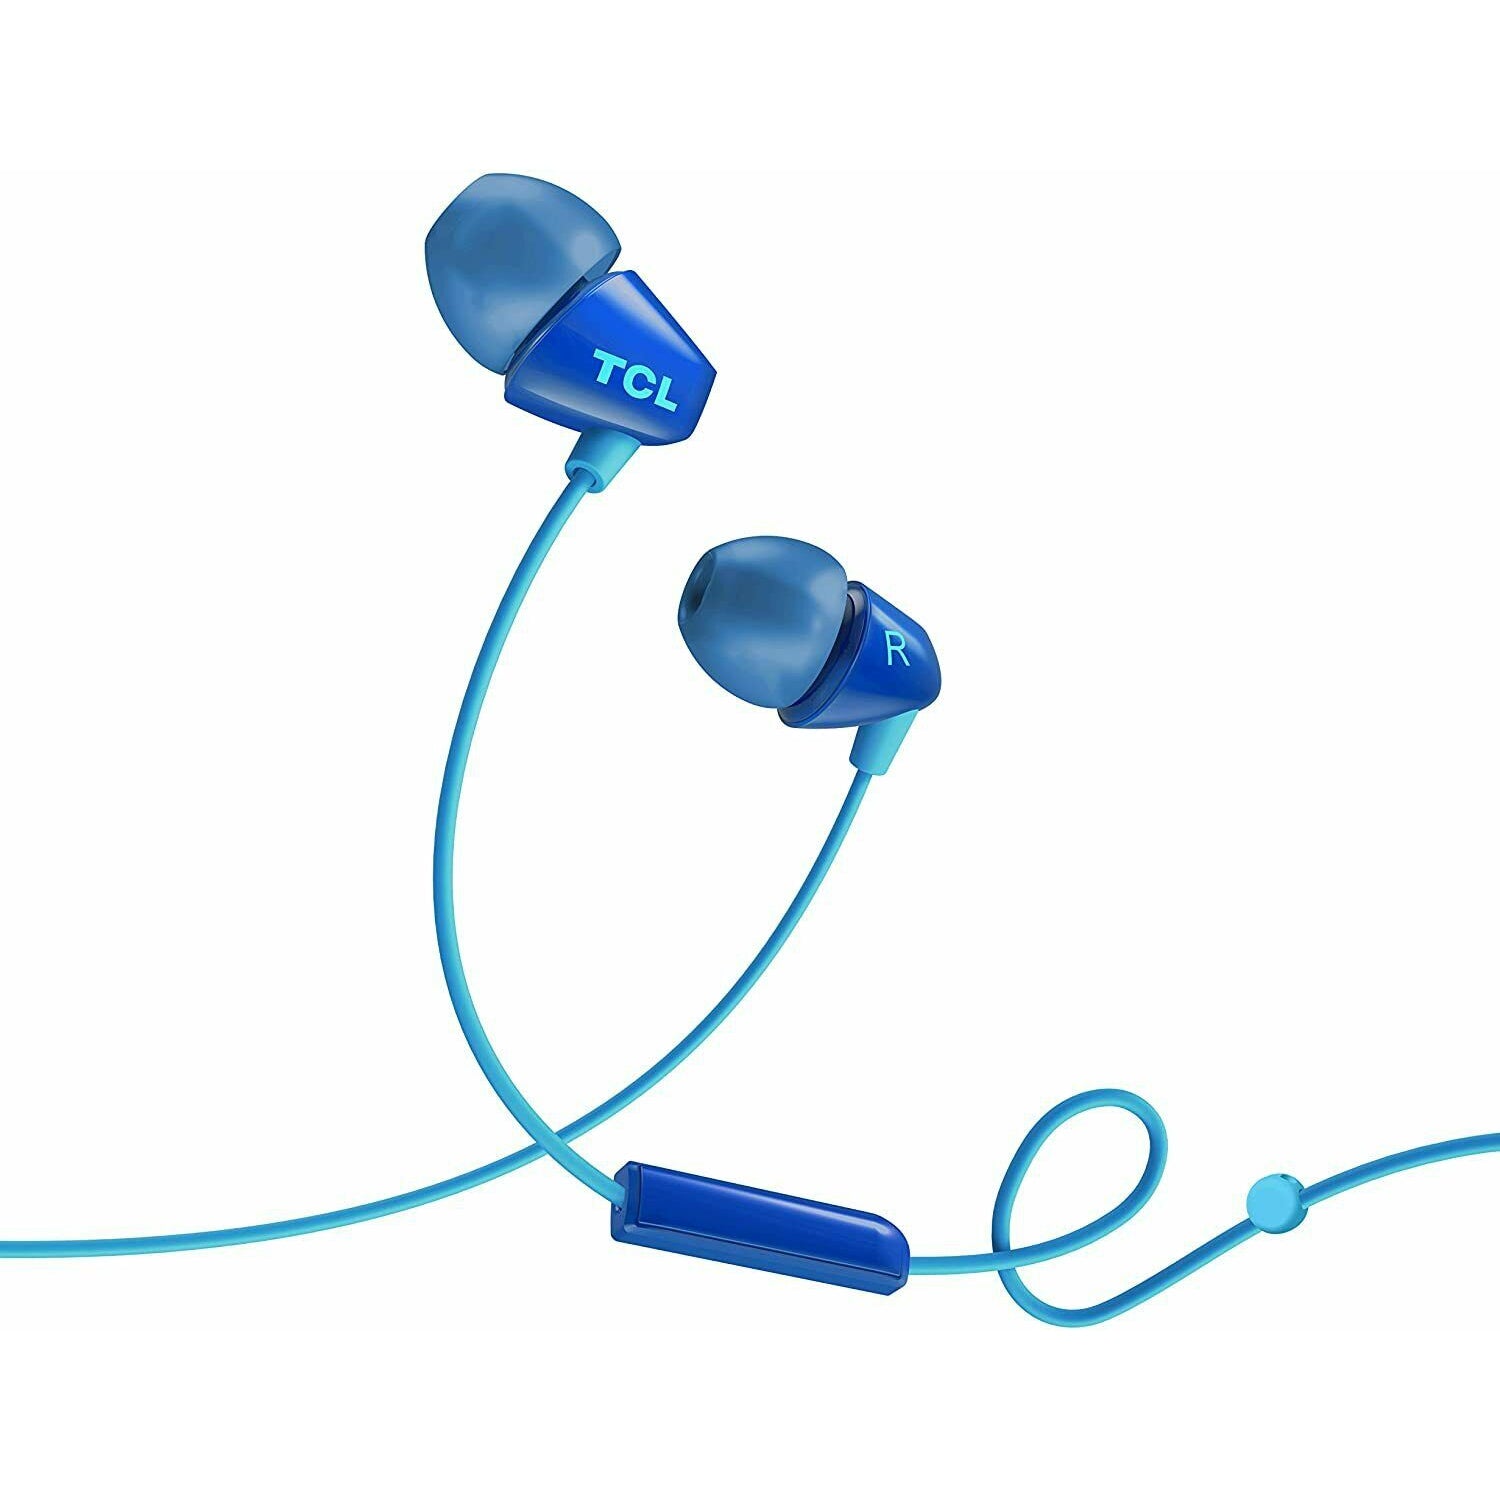 TCL SOCL100 In-Ear Headphones with Mic (Noise Isolation, Remote, Mic) Ocean Blue